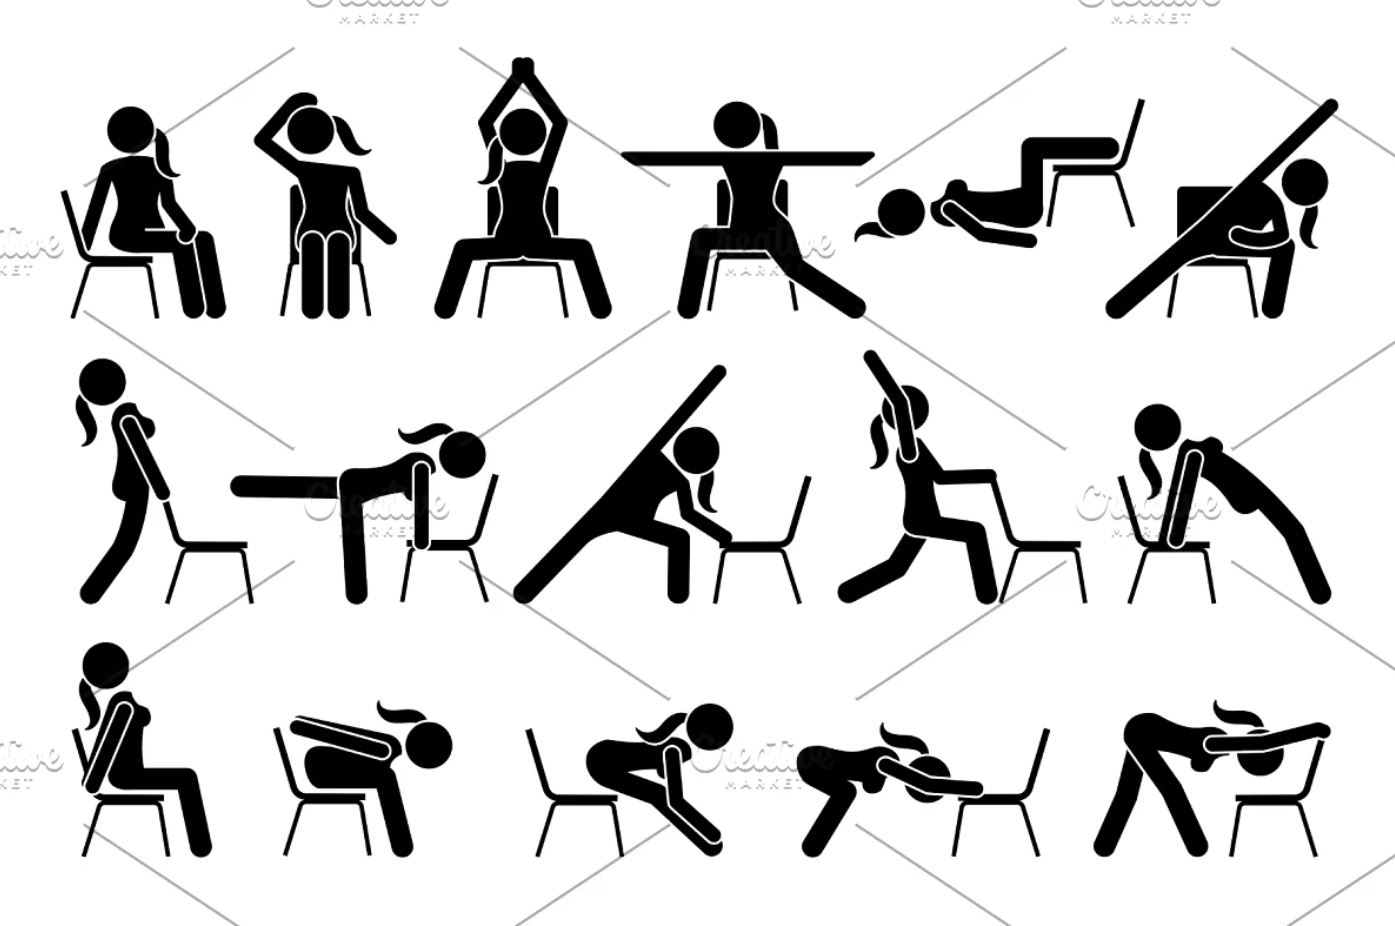 Workout Silhouettes Vector Designs